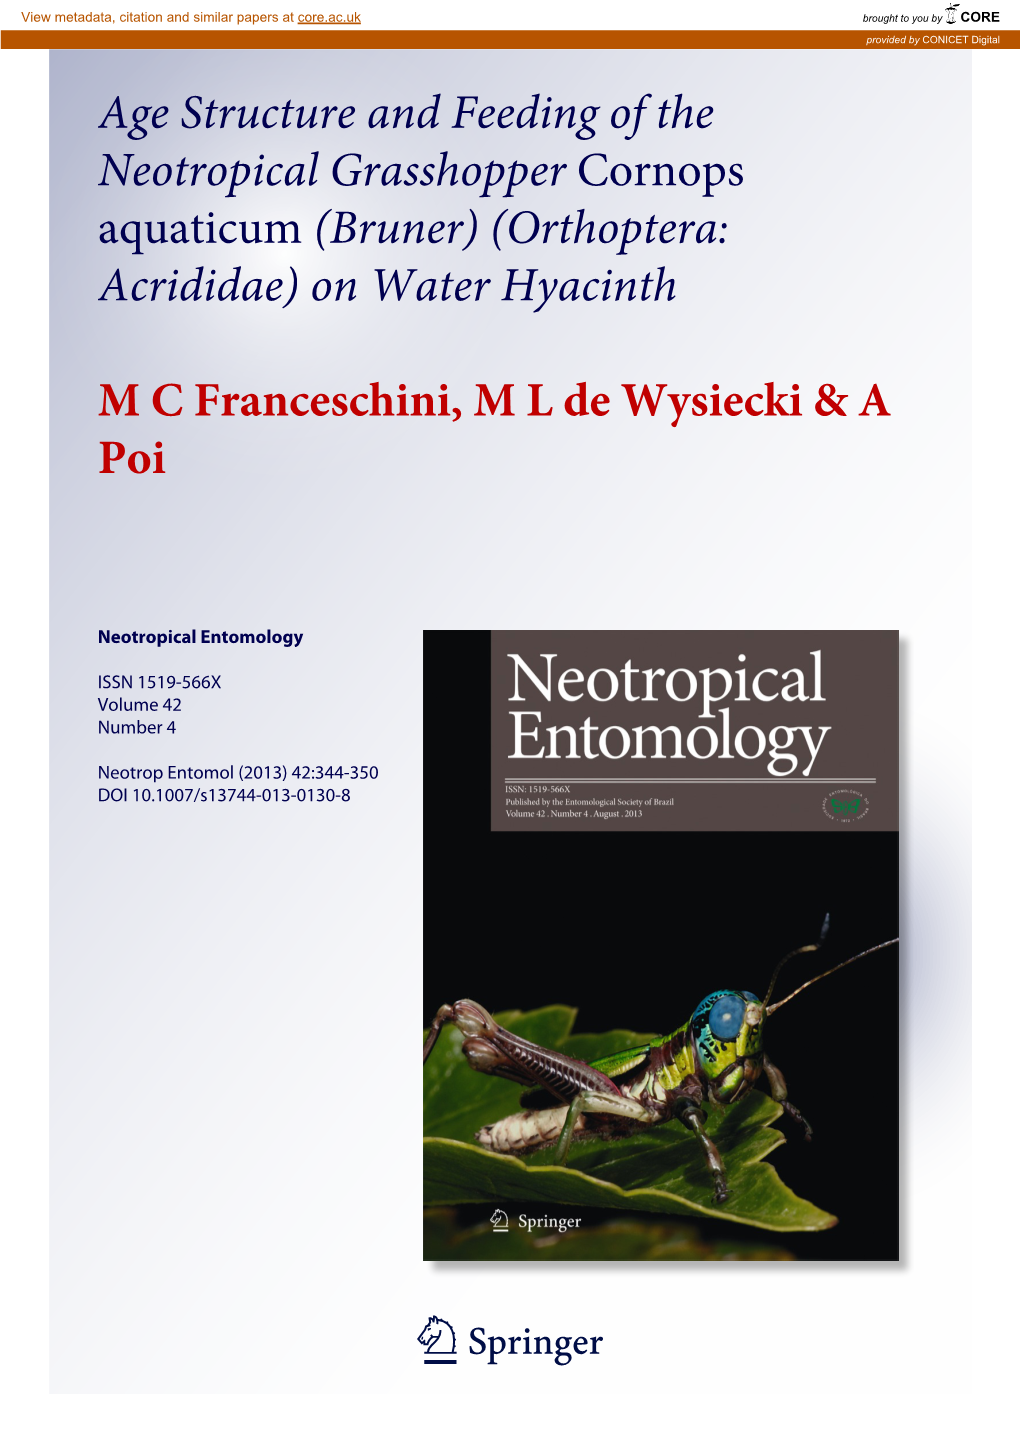 Orthoptera: Acrididae) on Water Hyacinth